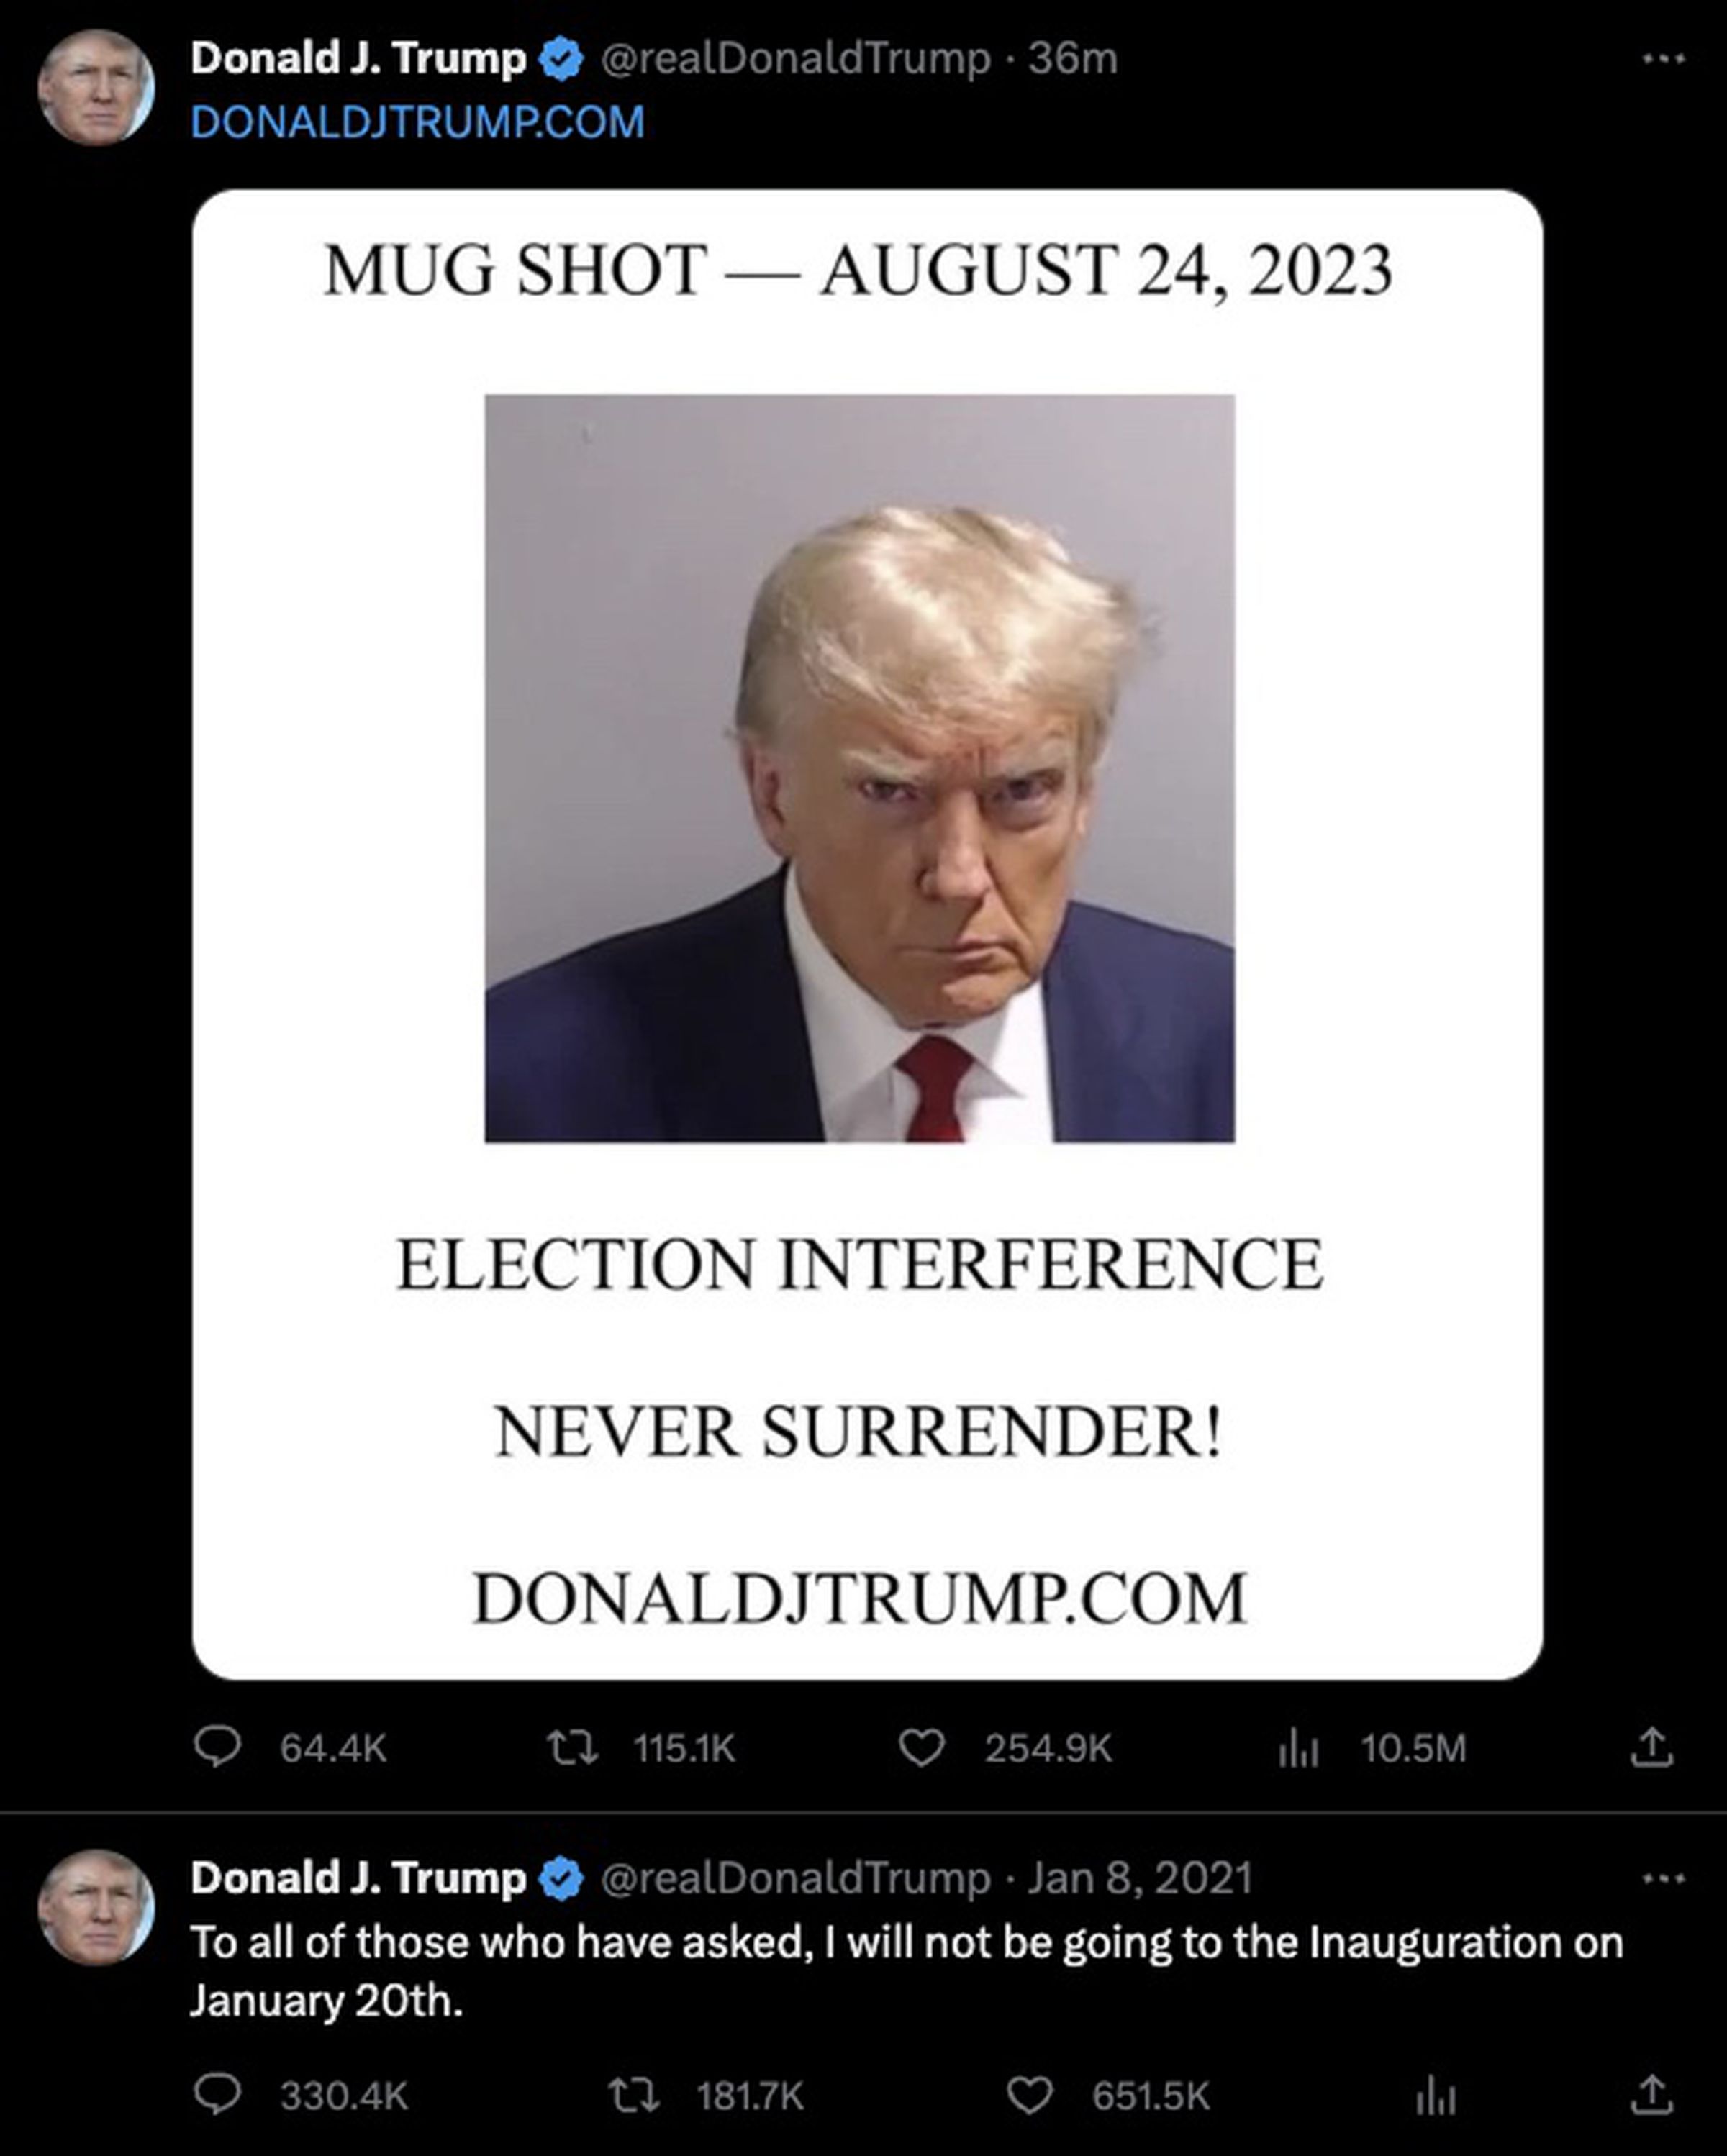 The most recent two posts from @realdonaldtrump, with a picture of his mugshot from August 24th, 2023, and a tweet from January8th 2021 saying he would not be going to the inauguration.